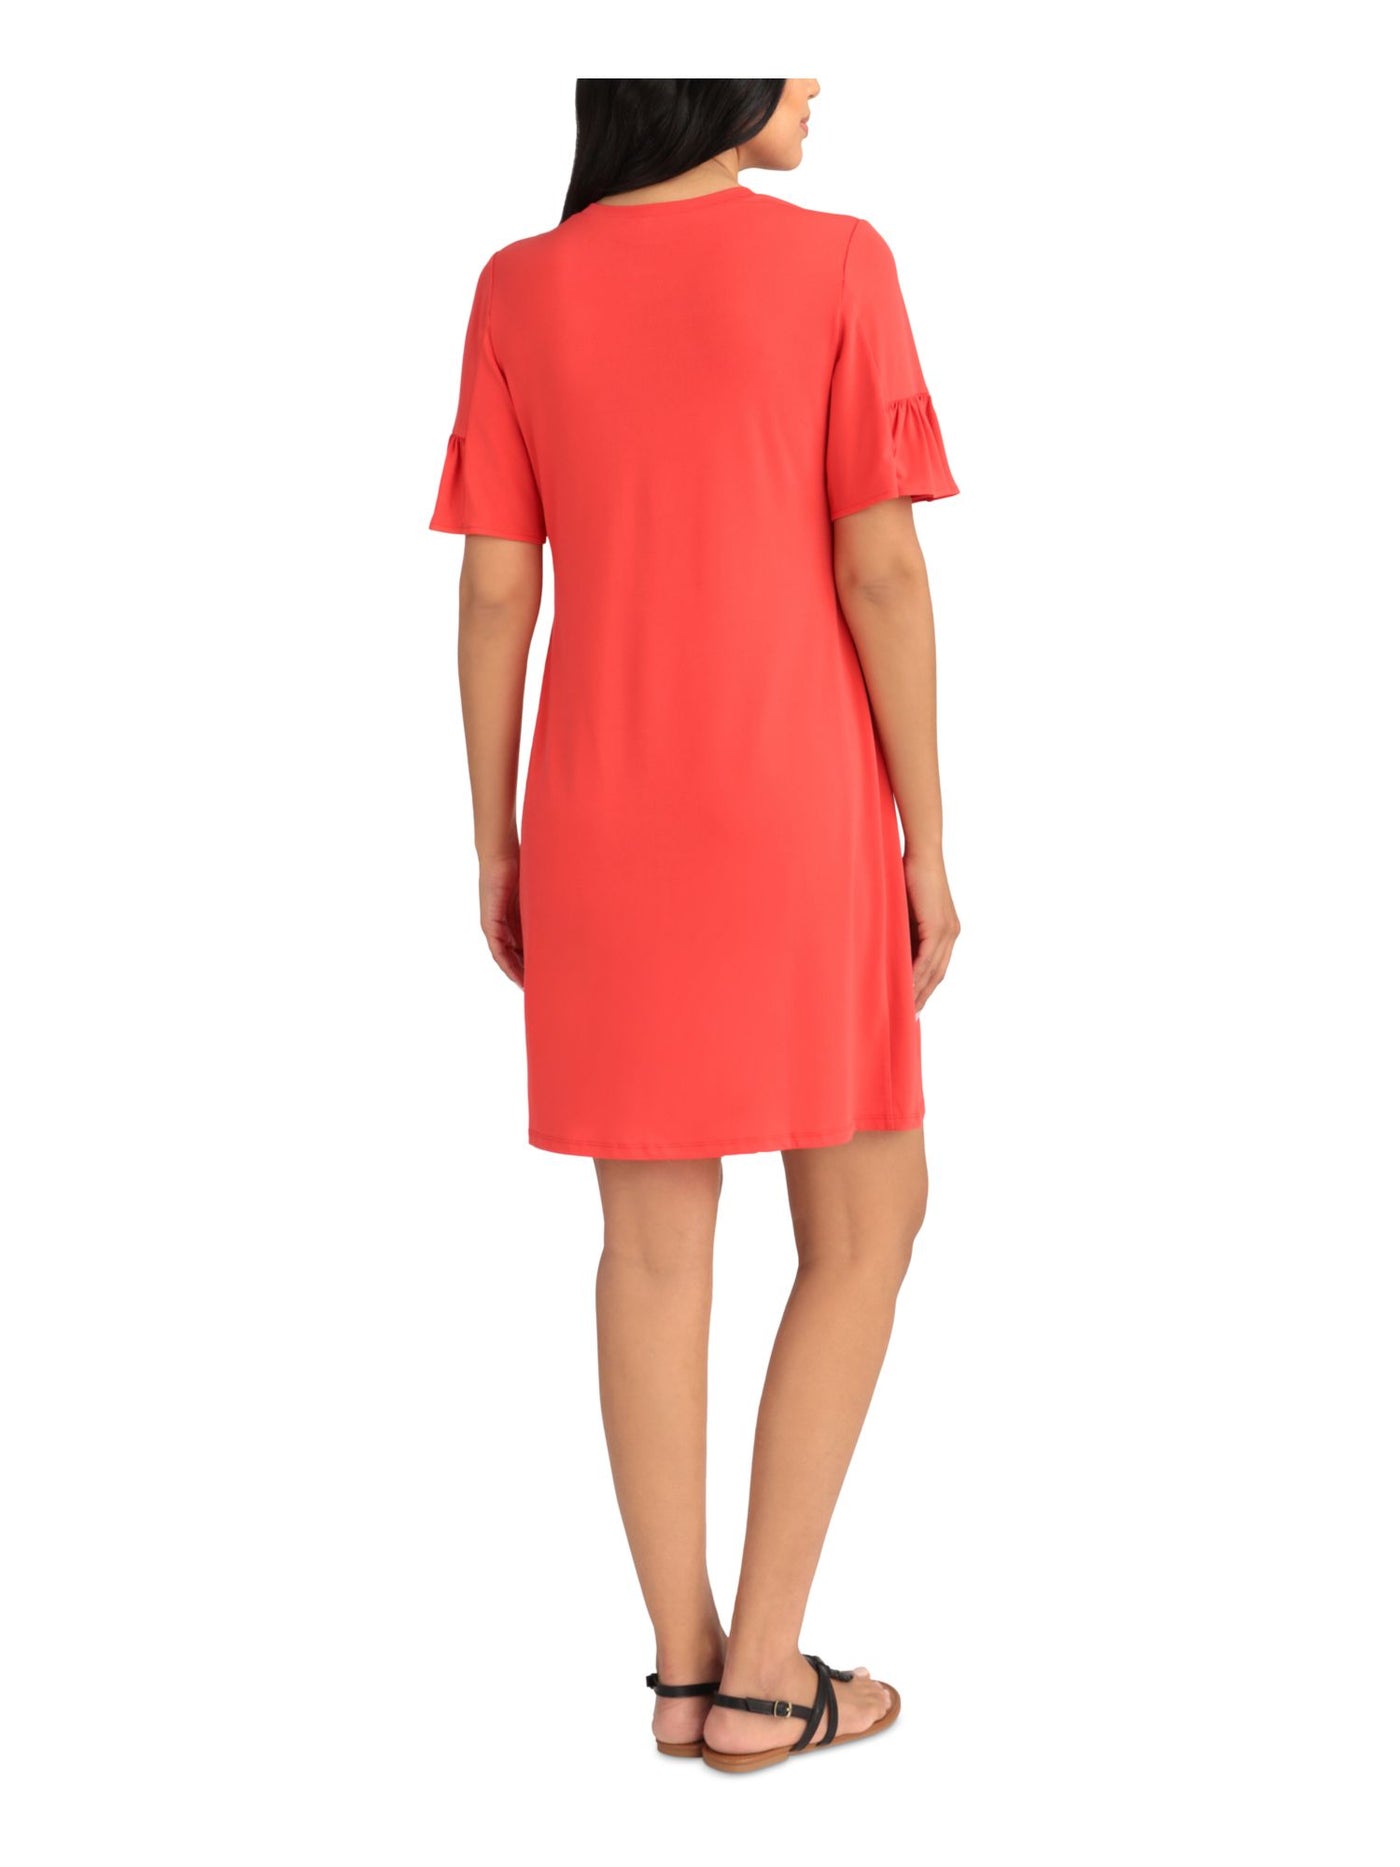 LONDON TIMES PETITES Womens Coral Stretch Smocked Ruffled Jersey-knit Short Sleeve Jewel Neck Above The Knee Shift Dress Petites 8P